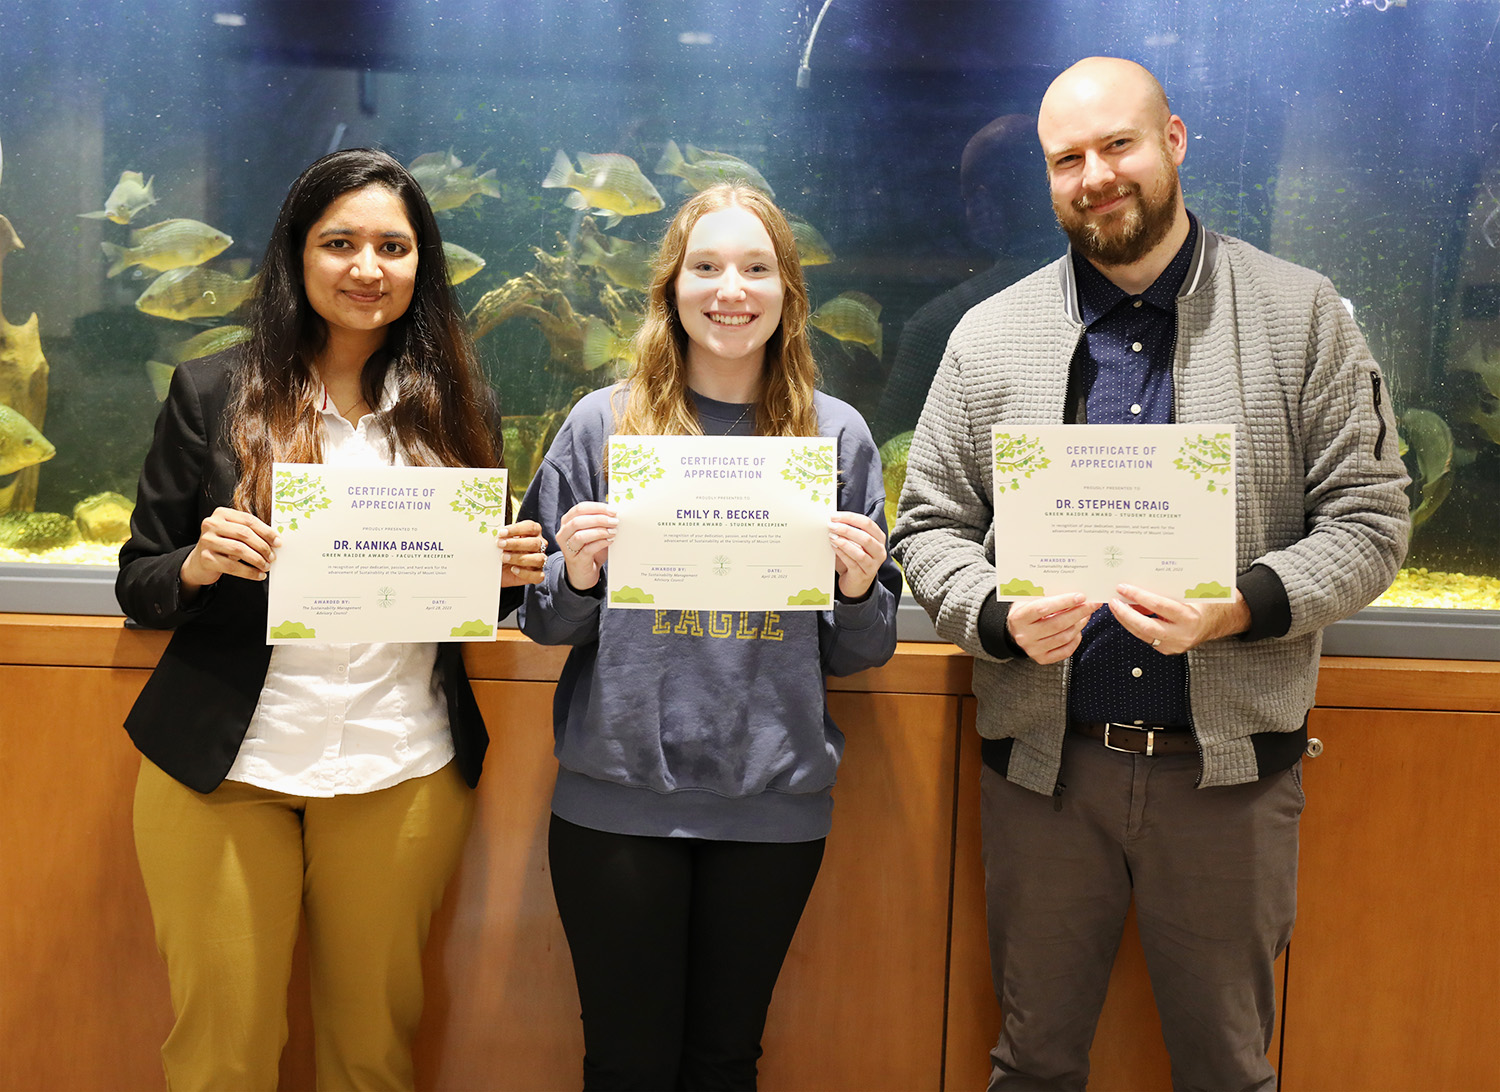 From left to right: Dr. Kanika Bansal , Emily C. Becker, and Dr. Stephen Craig stand smiling while holding their Green Raider Award Certificates in front of an aquarium in the Bracy Hall science building